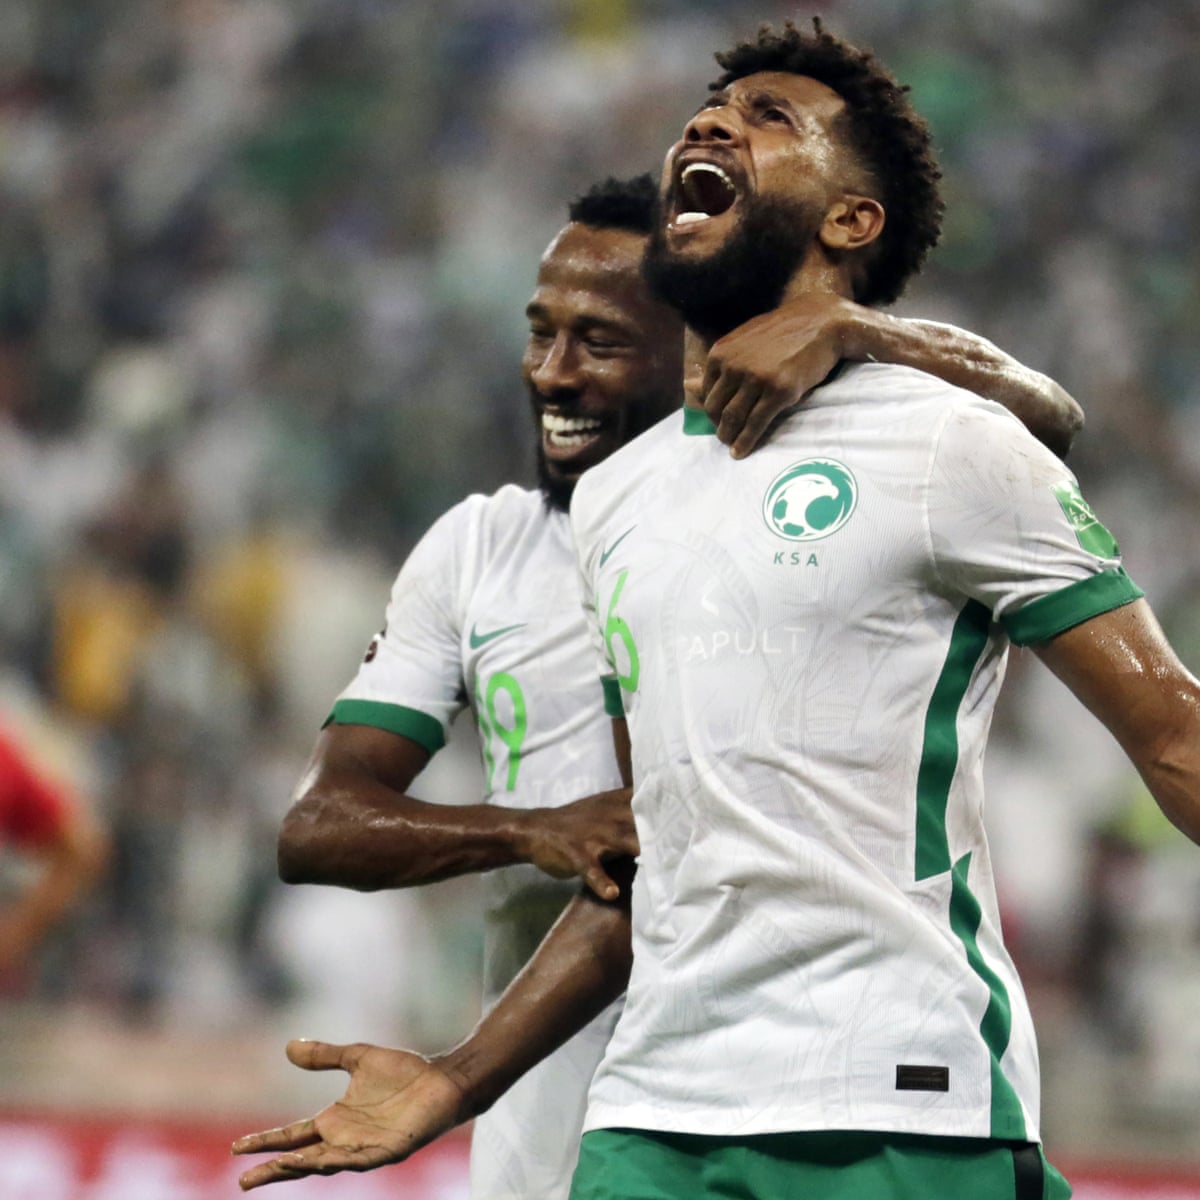 Why are soccer players going to Saudi Arabia?